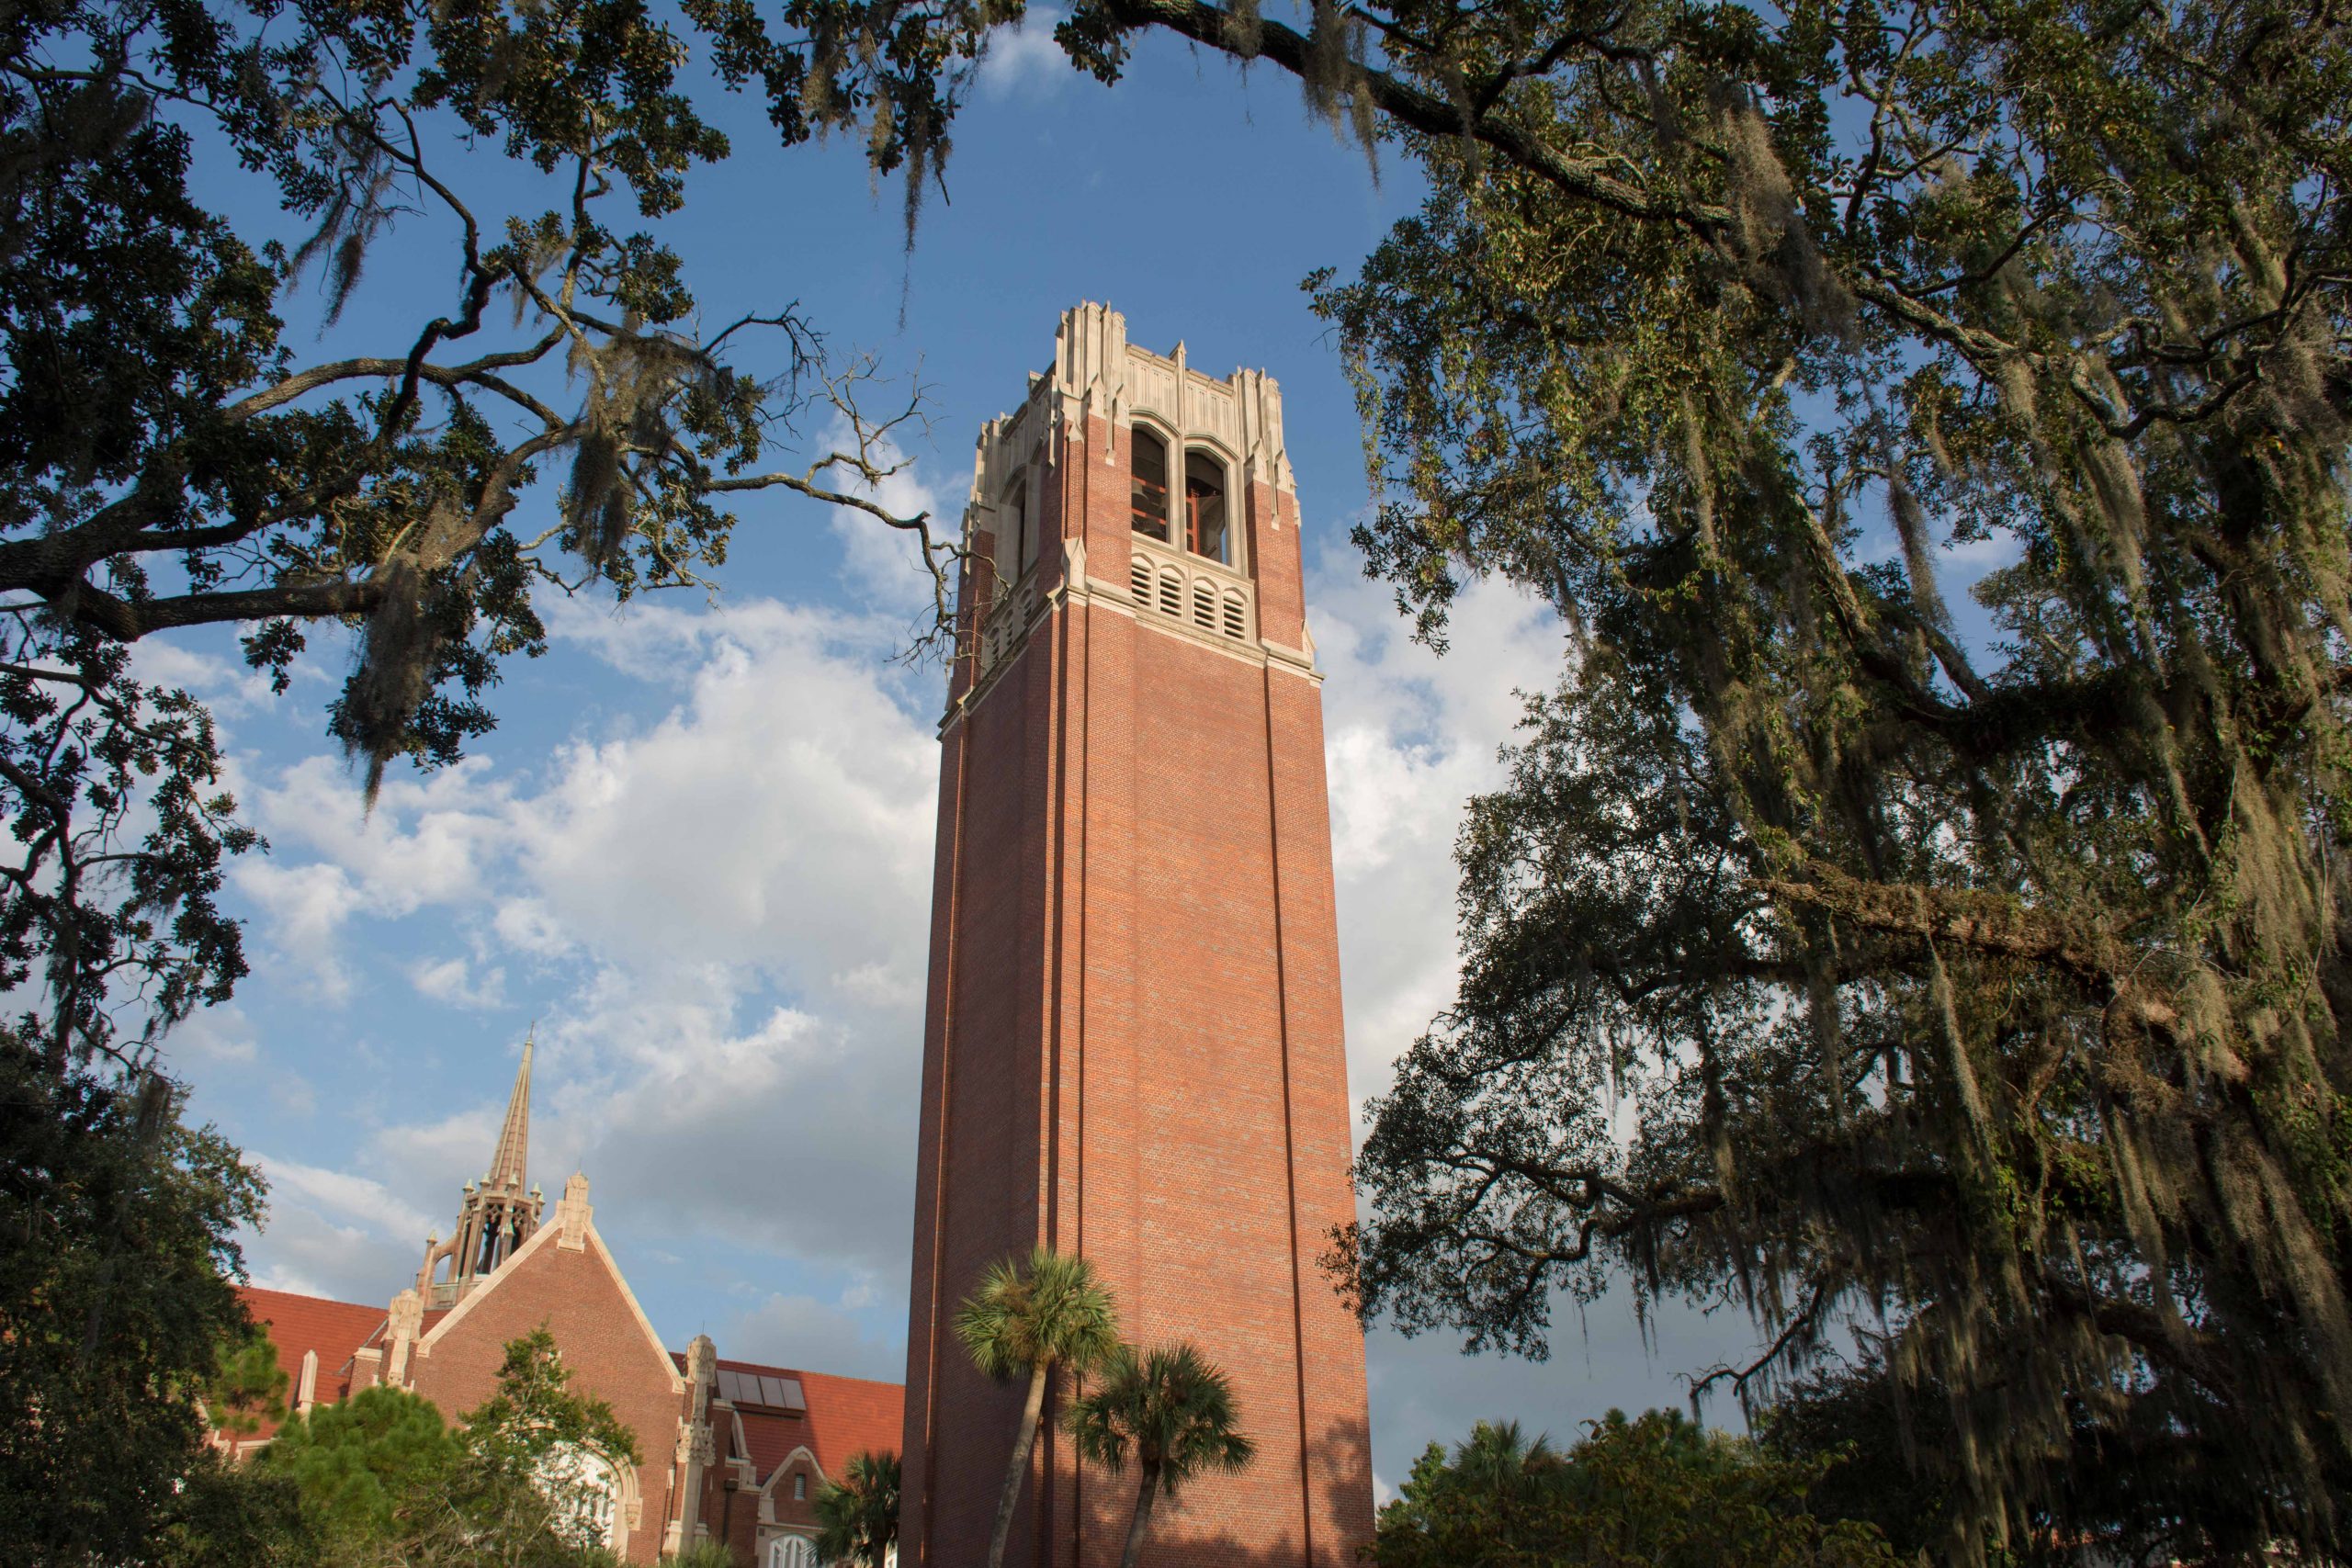 Centruy Tower on the UF campus